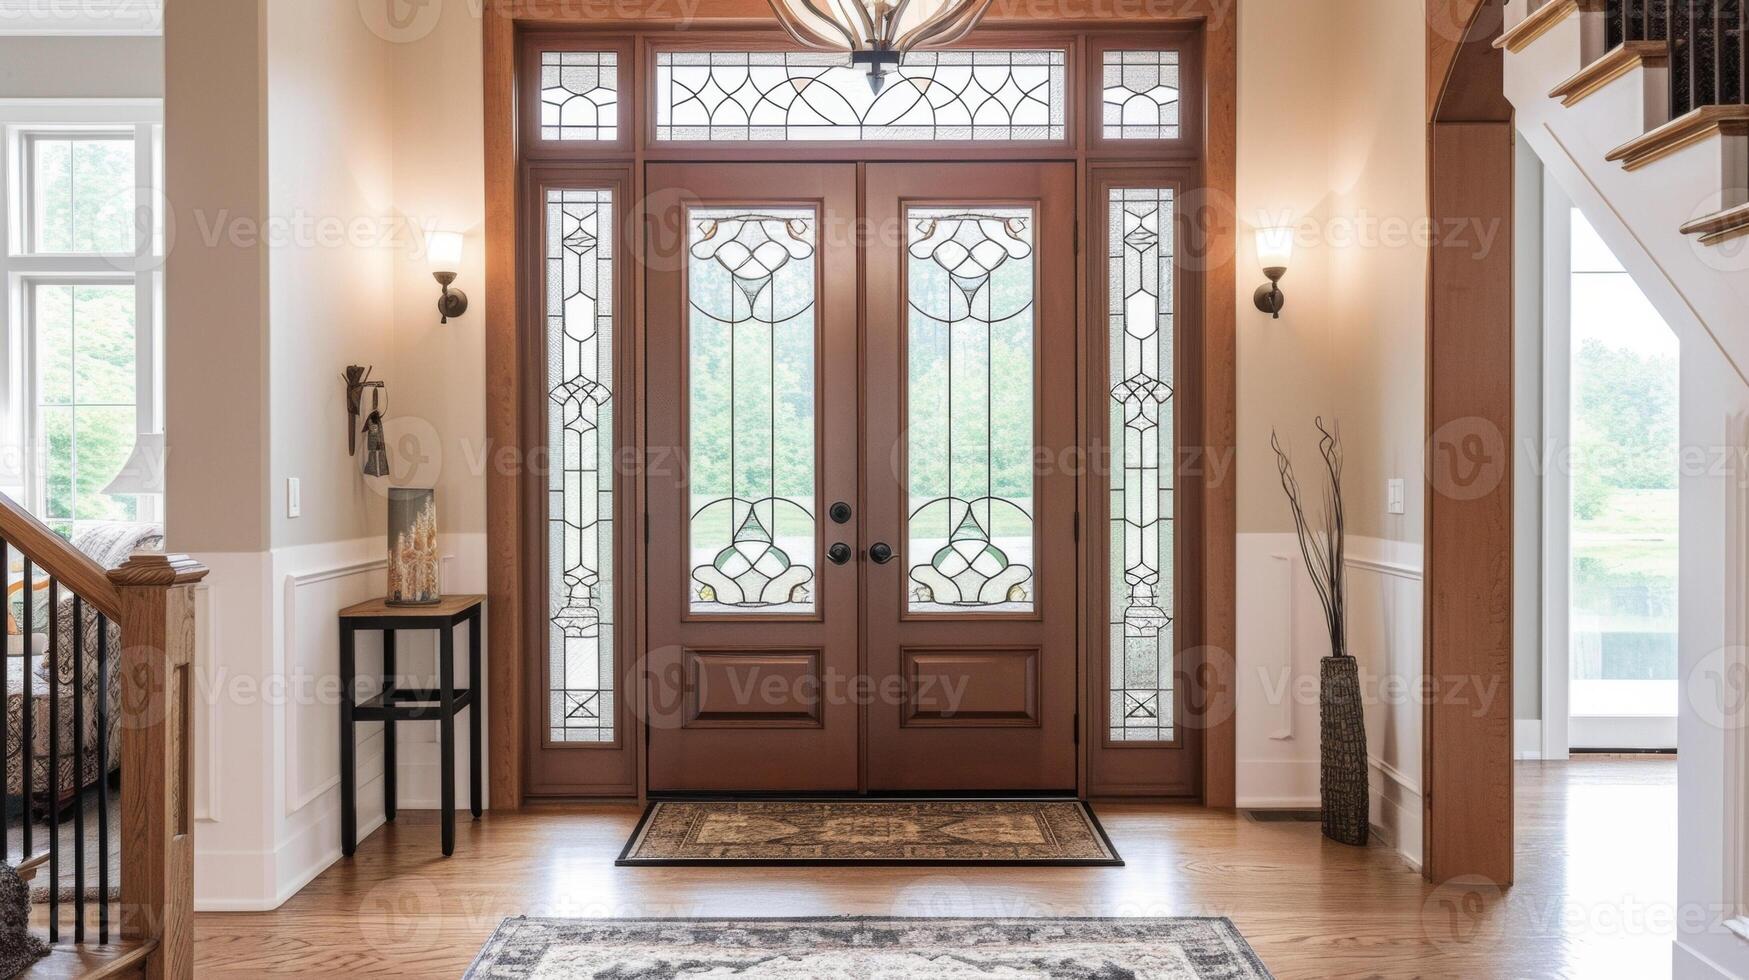 Spruce up your entryway with a sophisticated stained glass front door and matching sidelights making a statement while also increasing natural light in the foyer photo